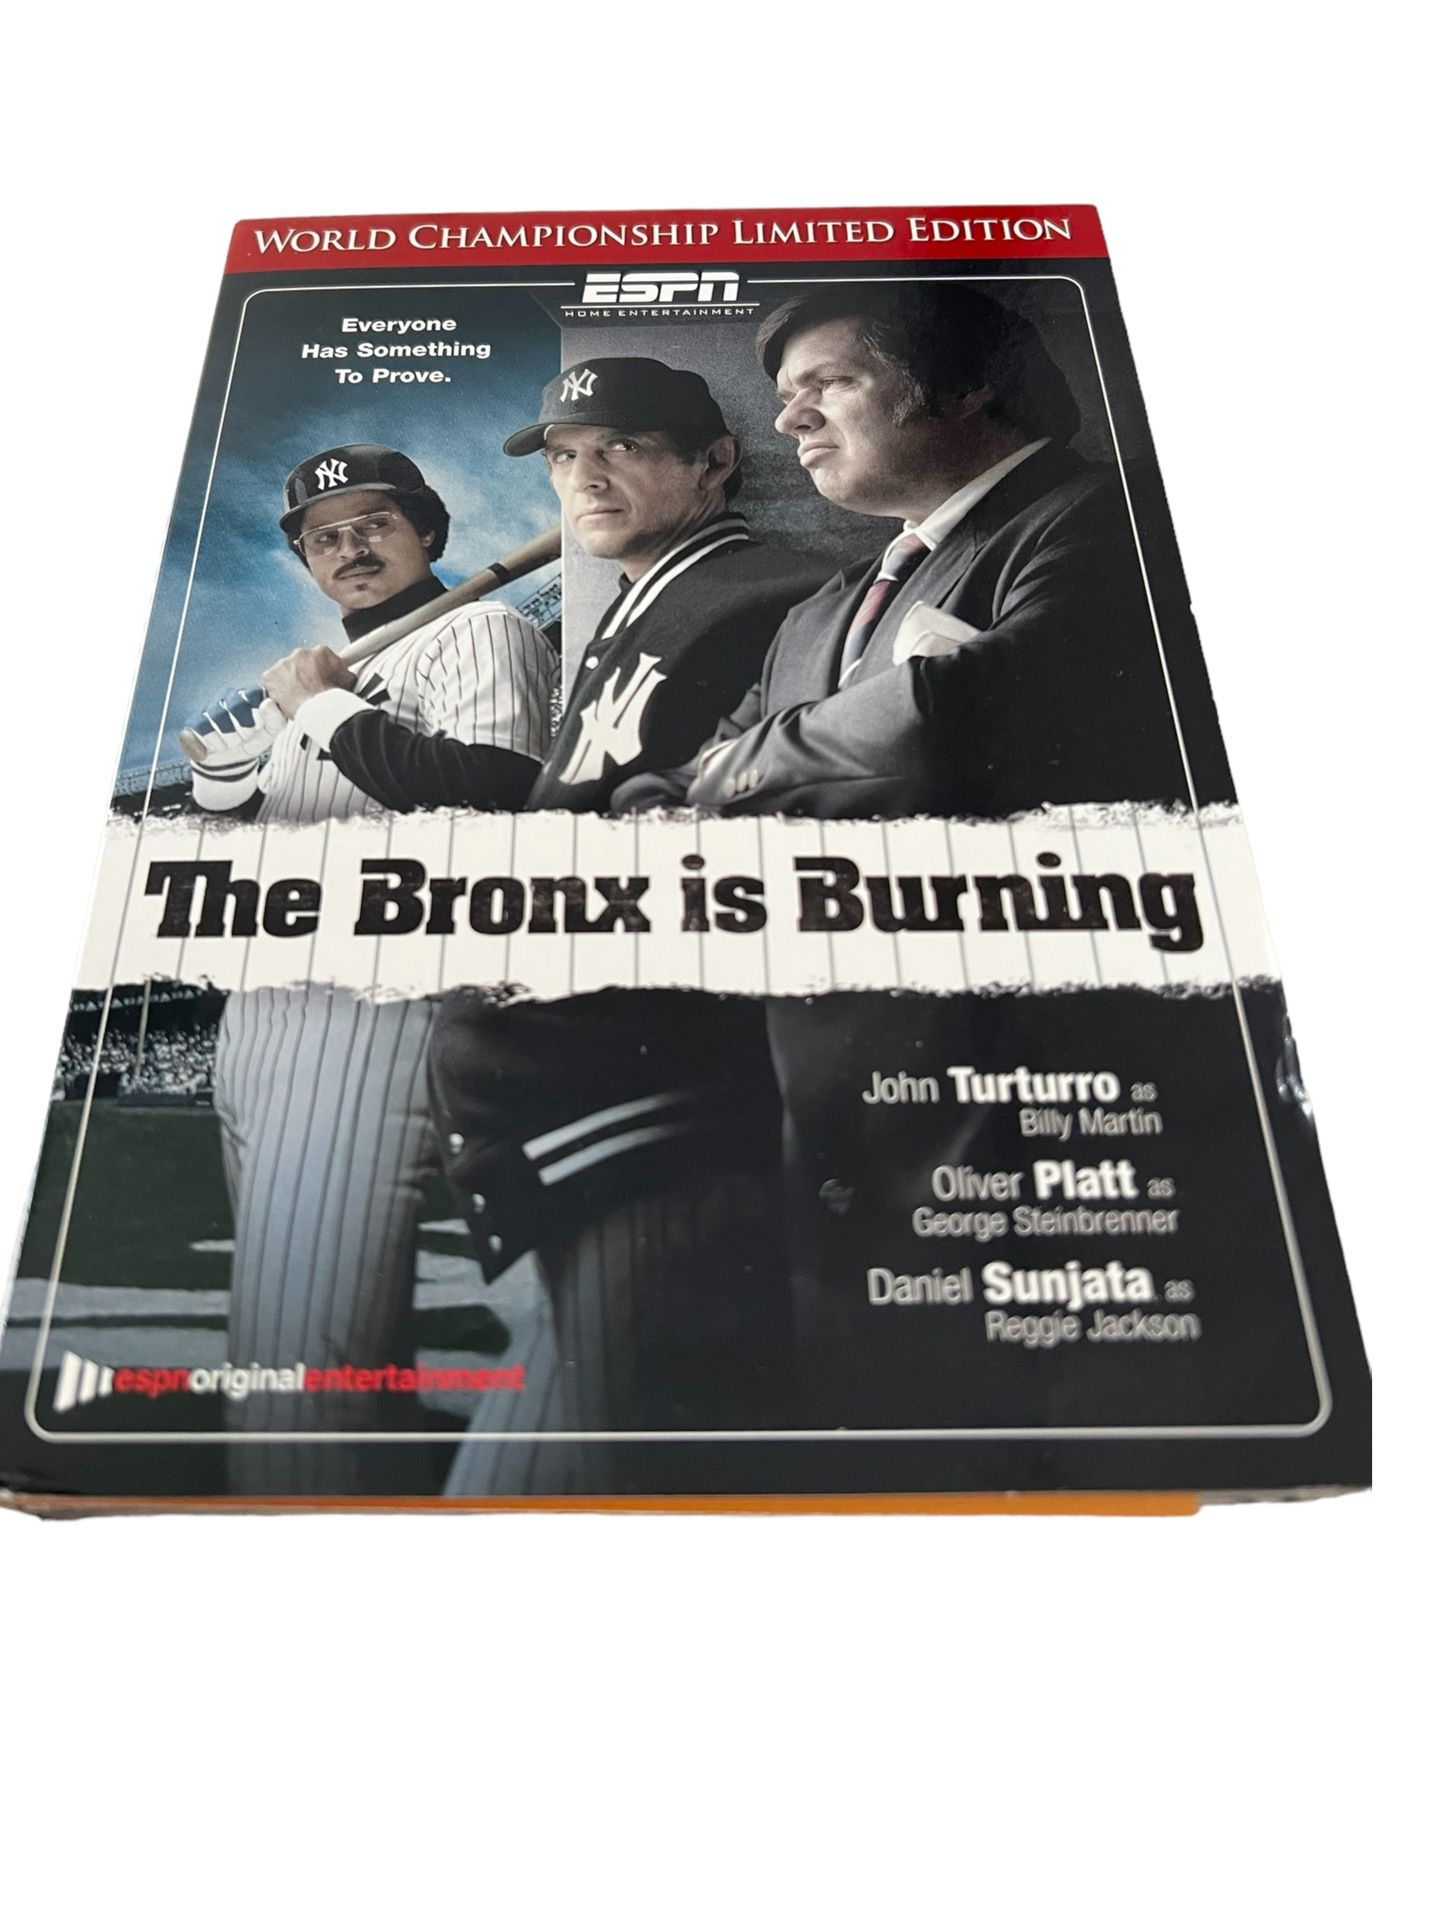 Bronx Is Burning (DVD, 2007) Baseball New York Yankees  Bronx Is Burning (DVD, 2007) Baseball New York Yankees  Experience the drama and excitement of